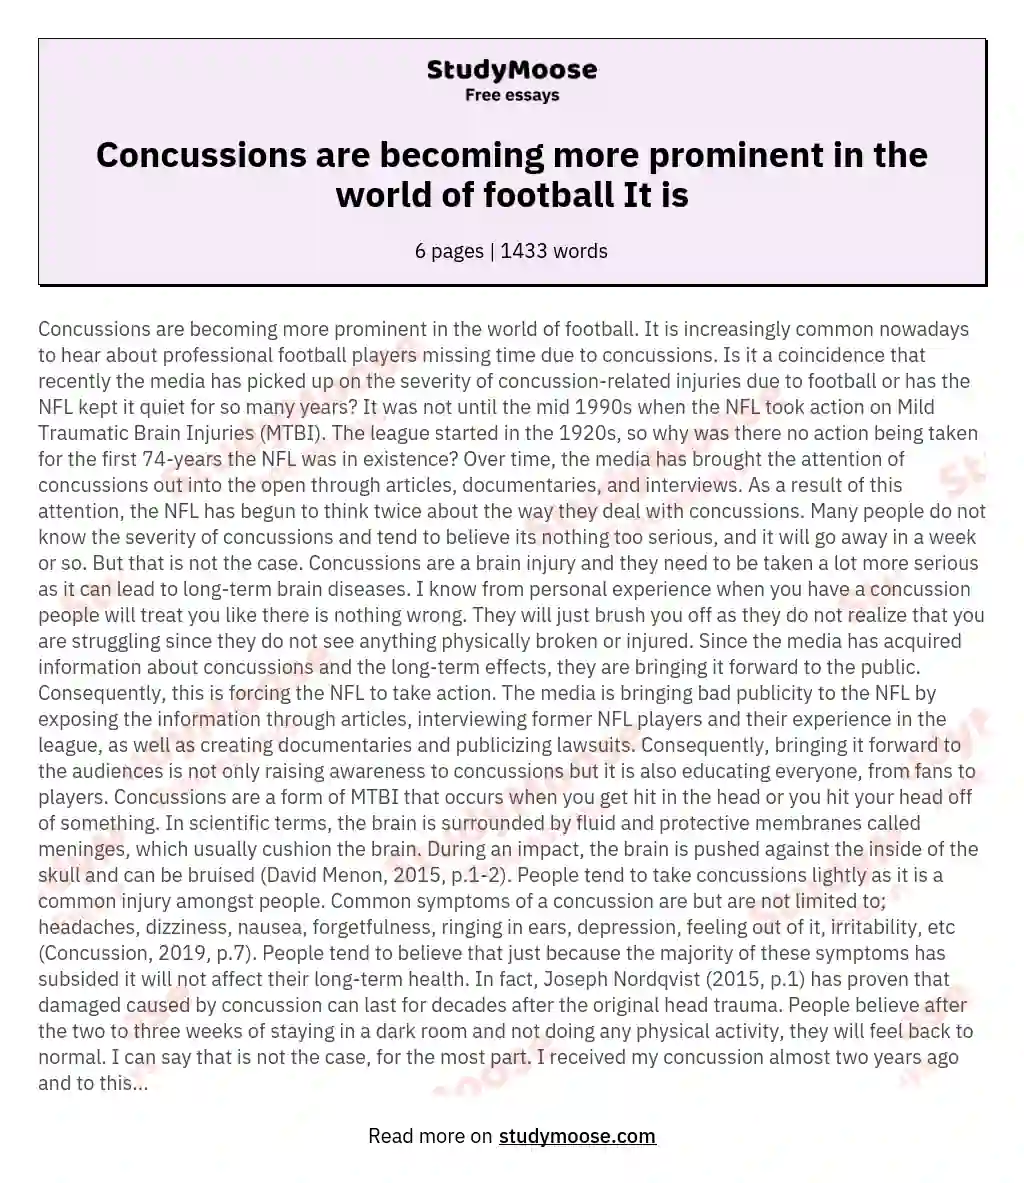 Concussions are becoming more prominent in the world of football It is